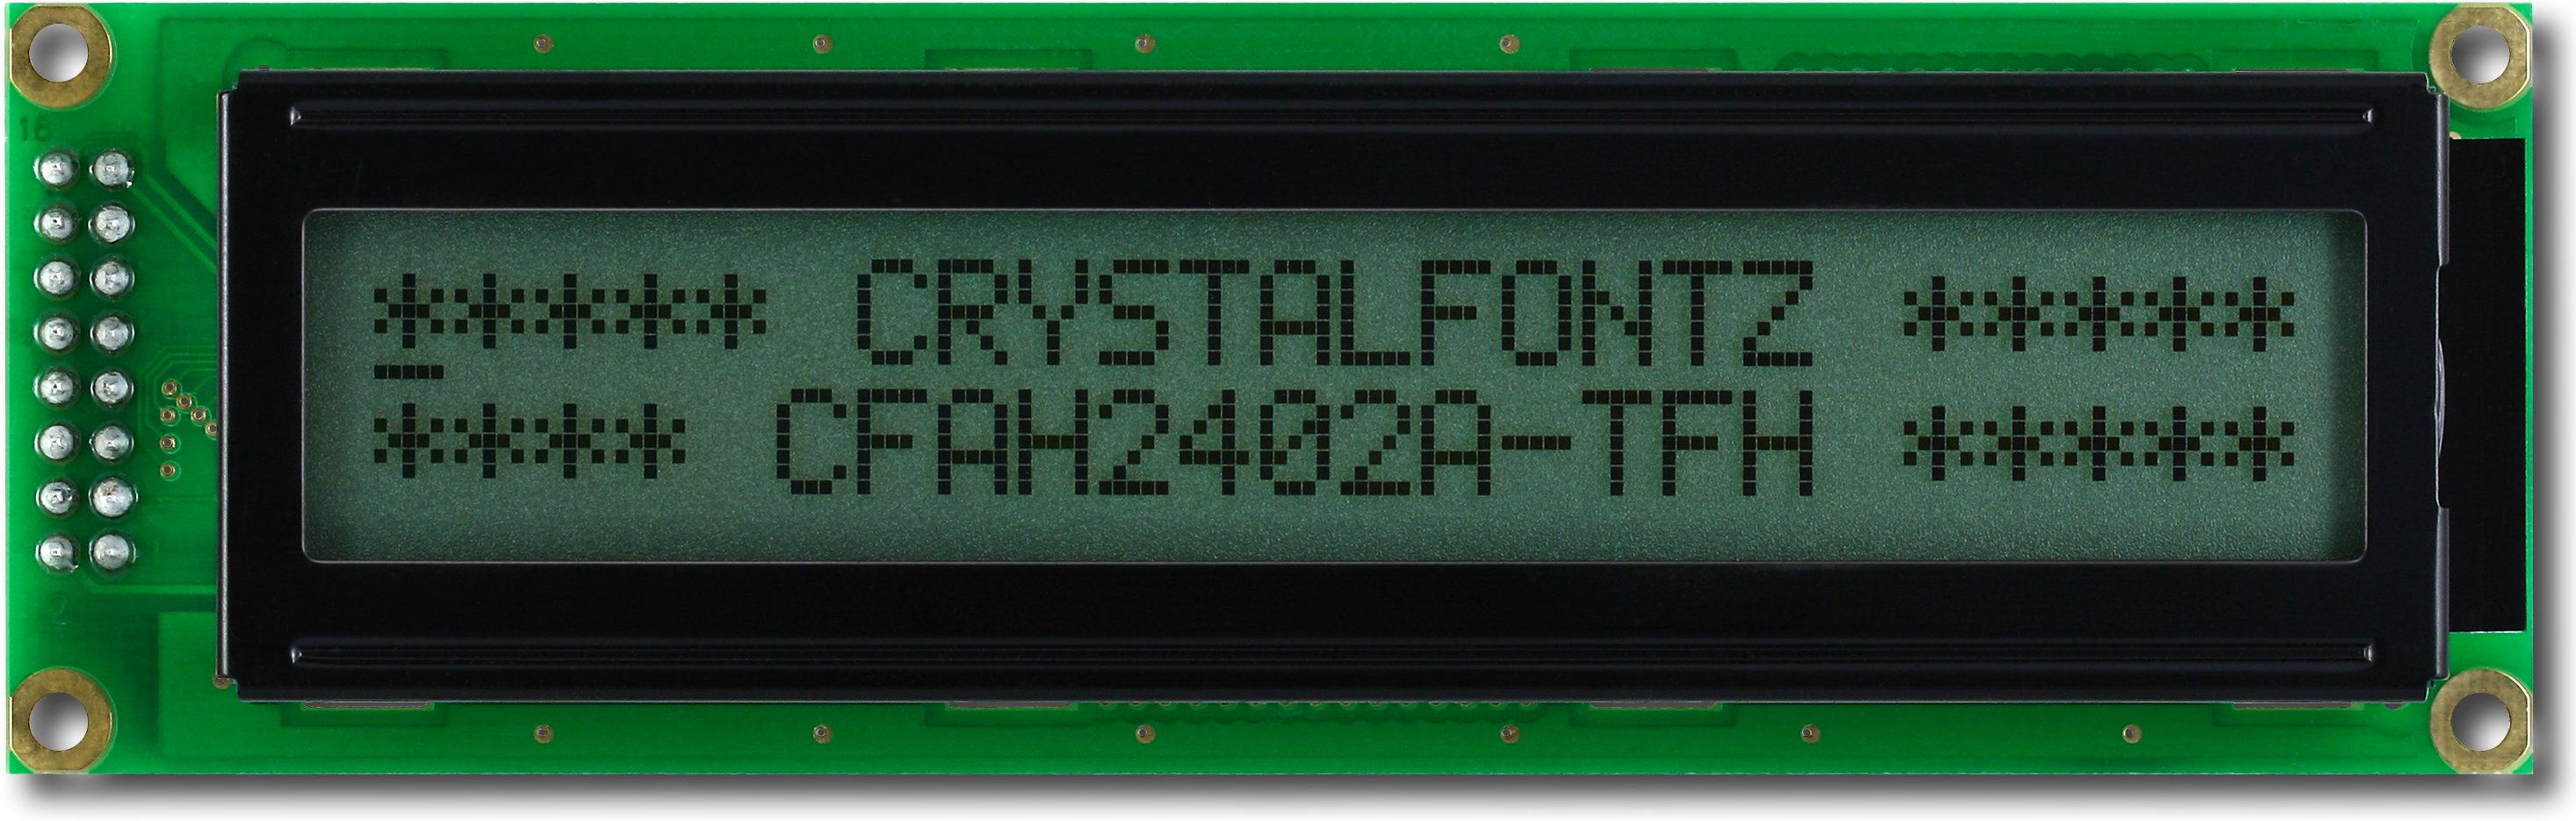 24x2 Character LCD